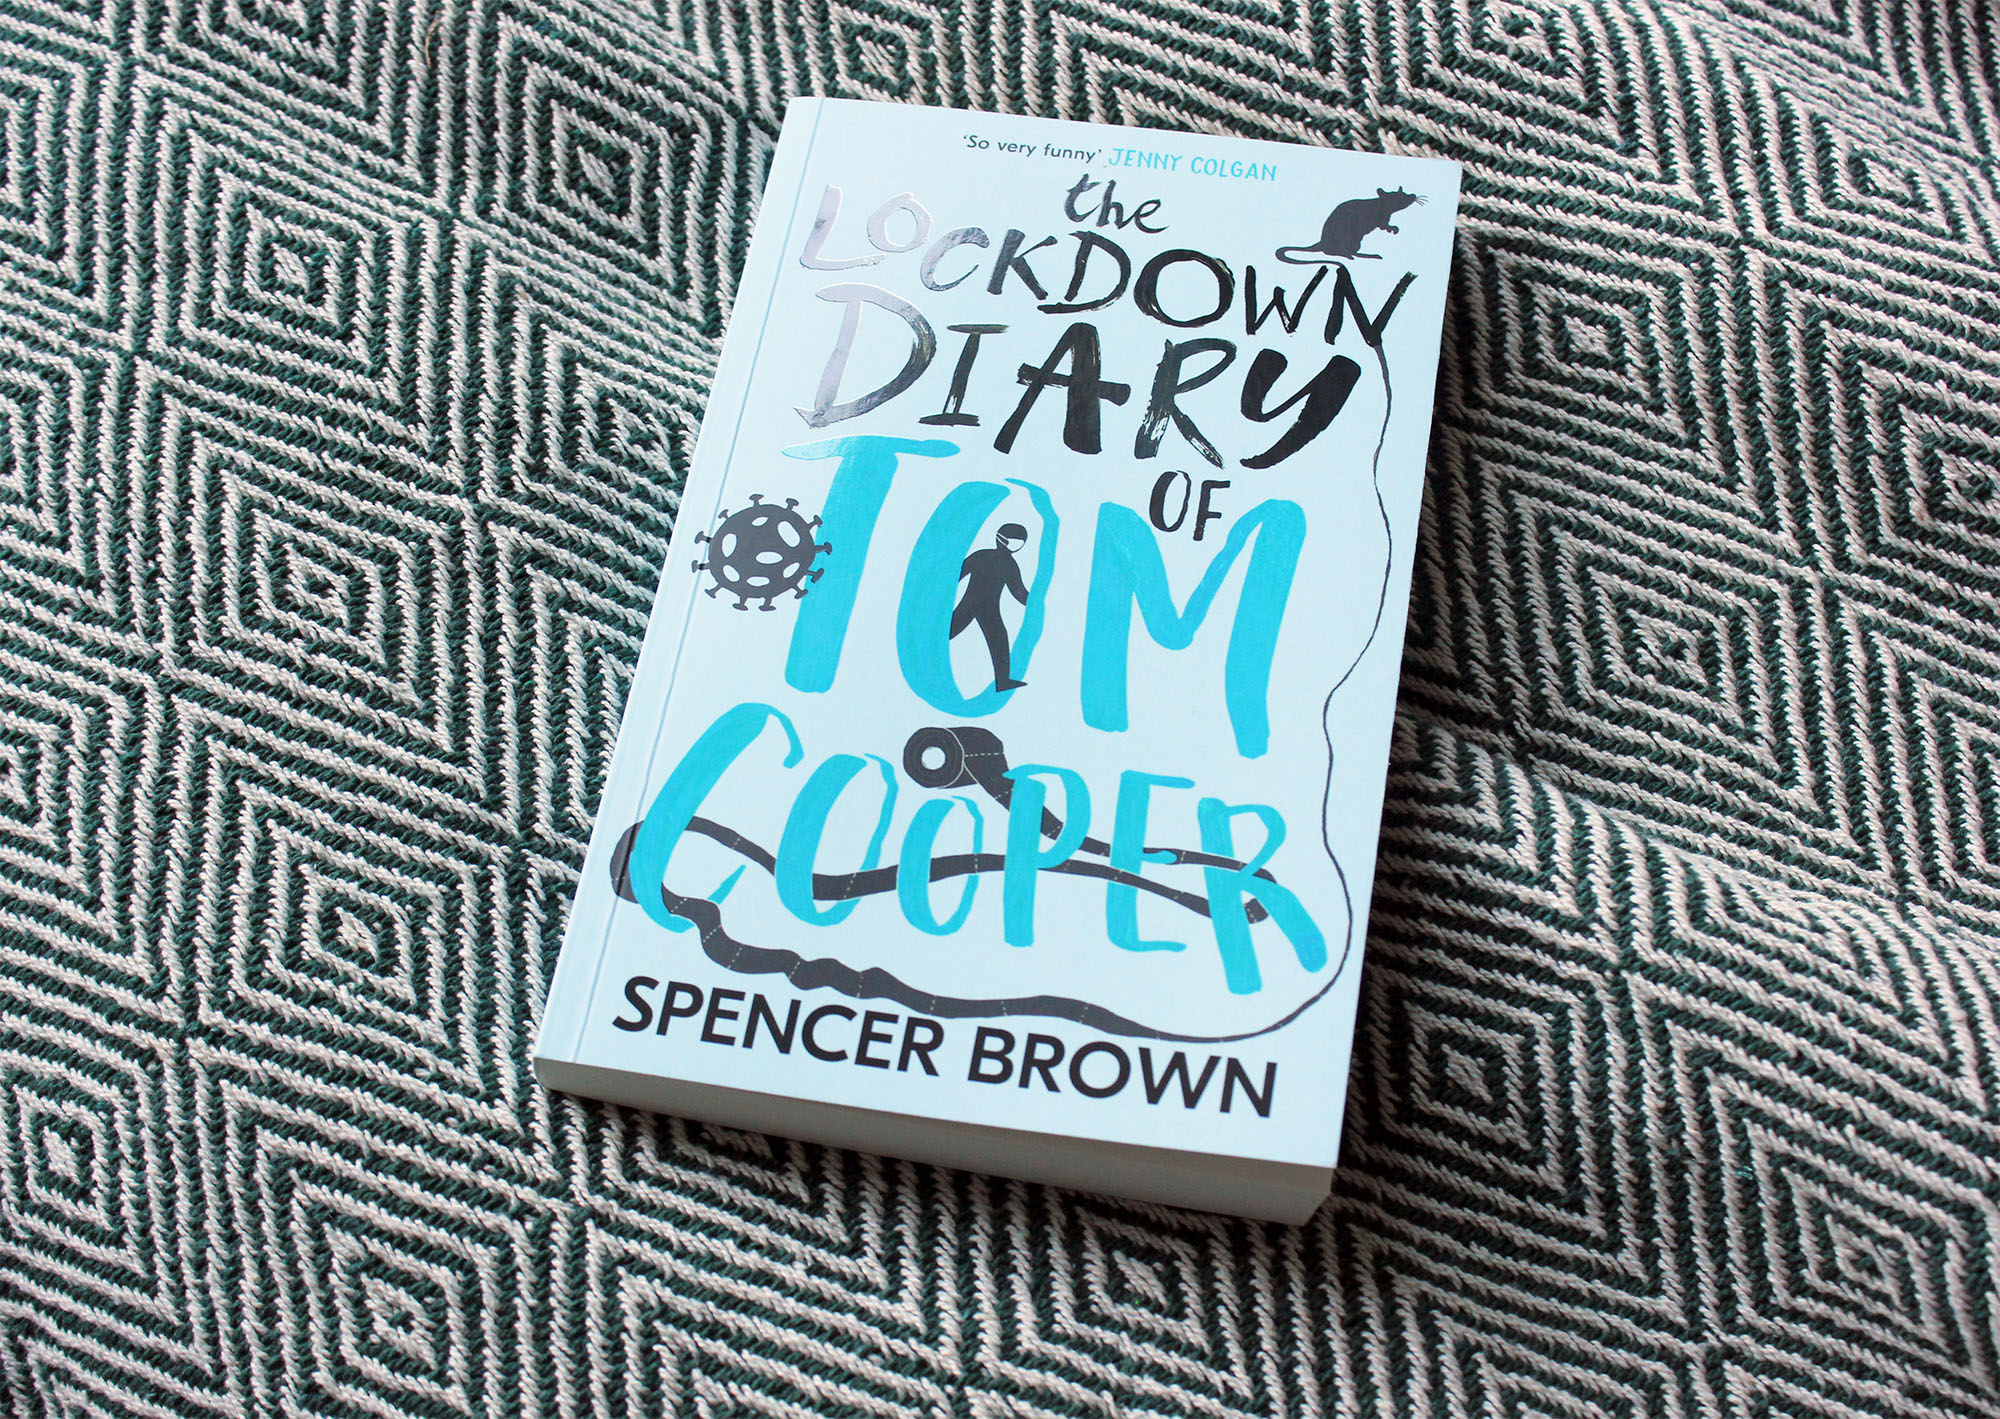 The Lockdown Diary of Tom Cooper by Spencer Brown